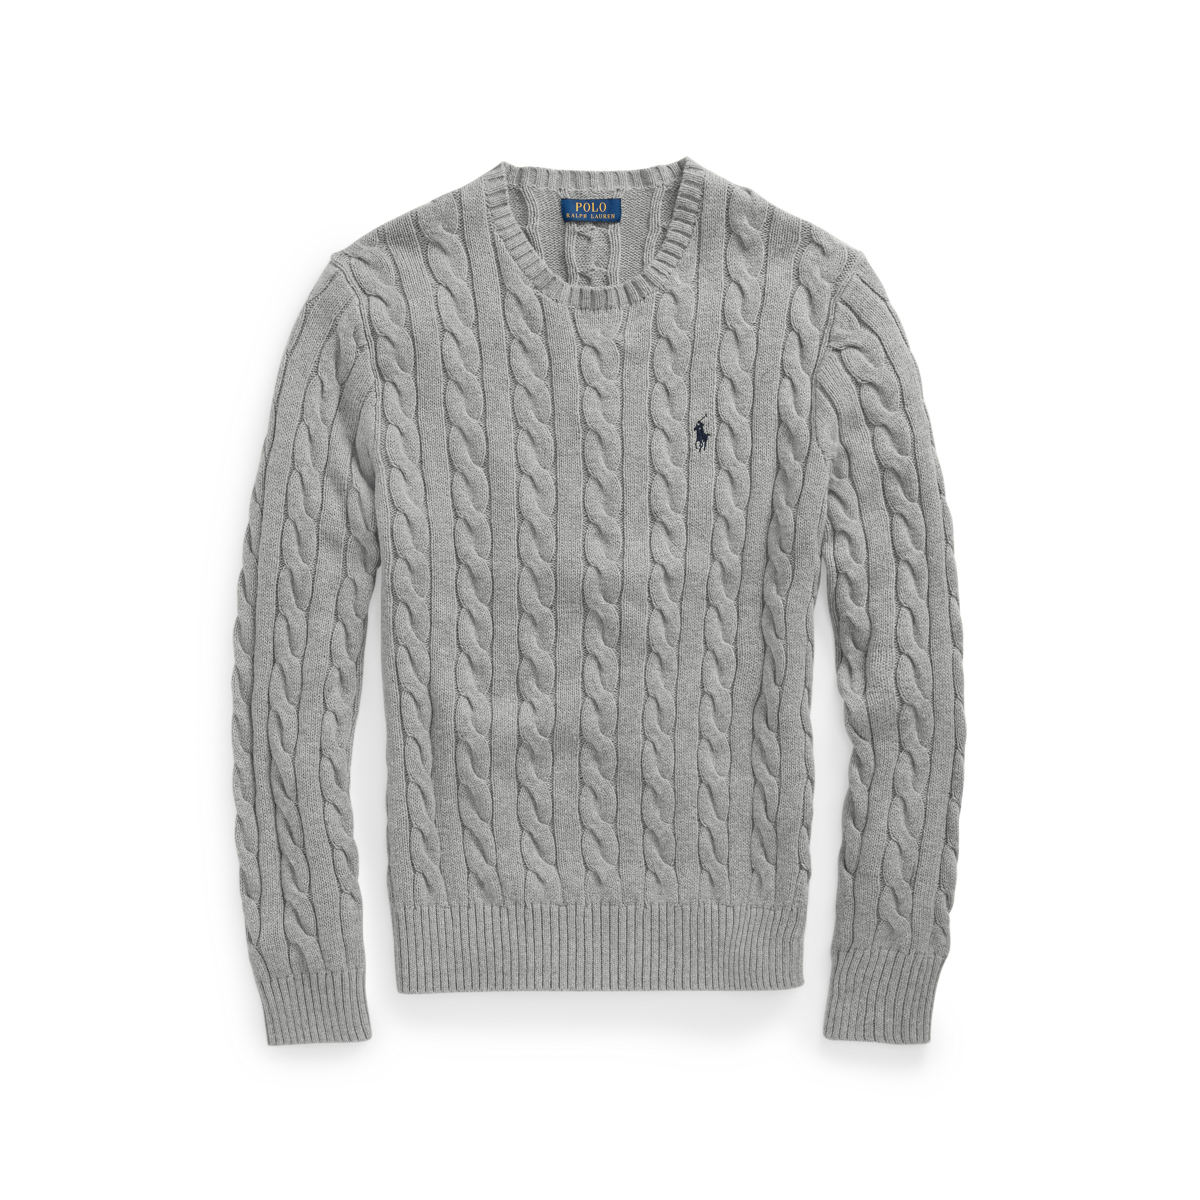 Polo Ralph Lauren Cable-Knit Cotton Sweater Men's Clothing Fawn Grey : LG